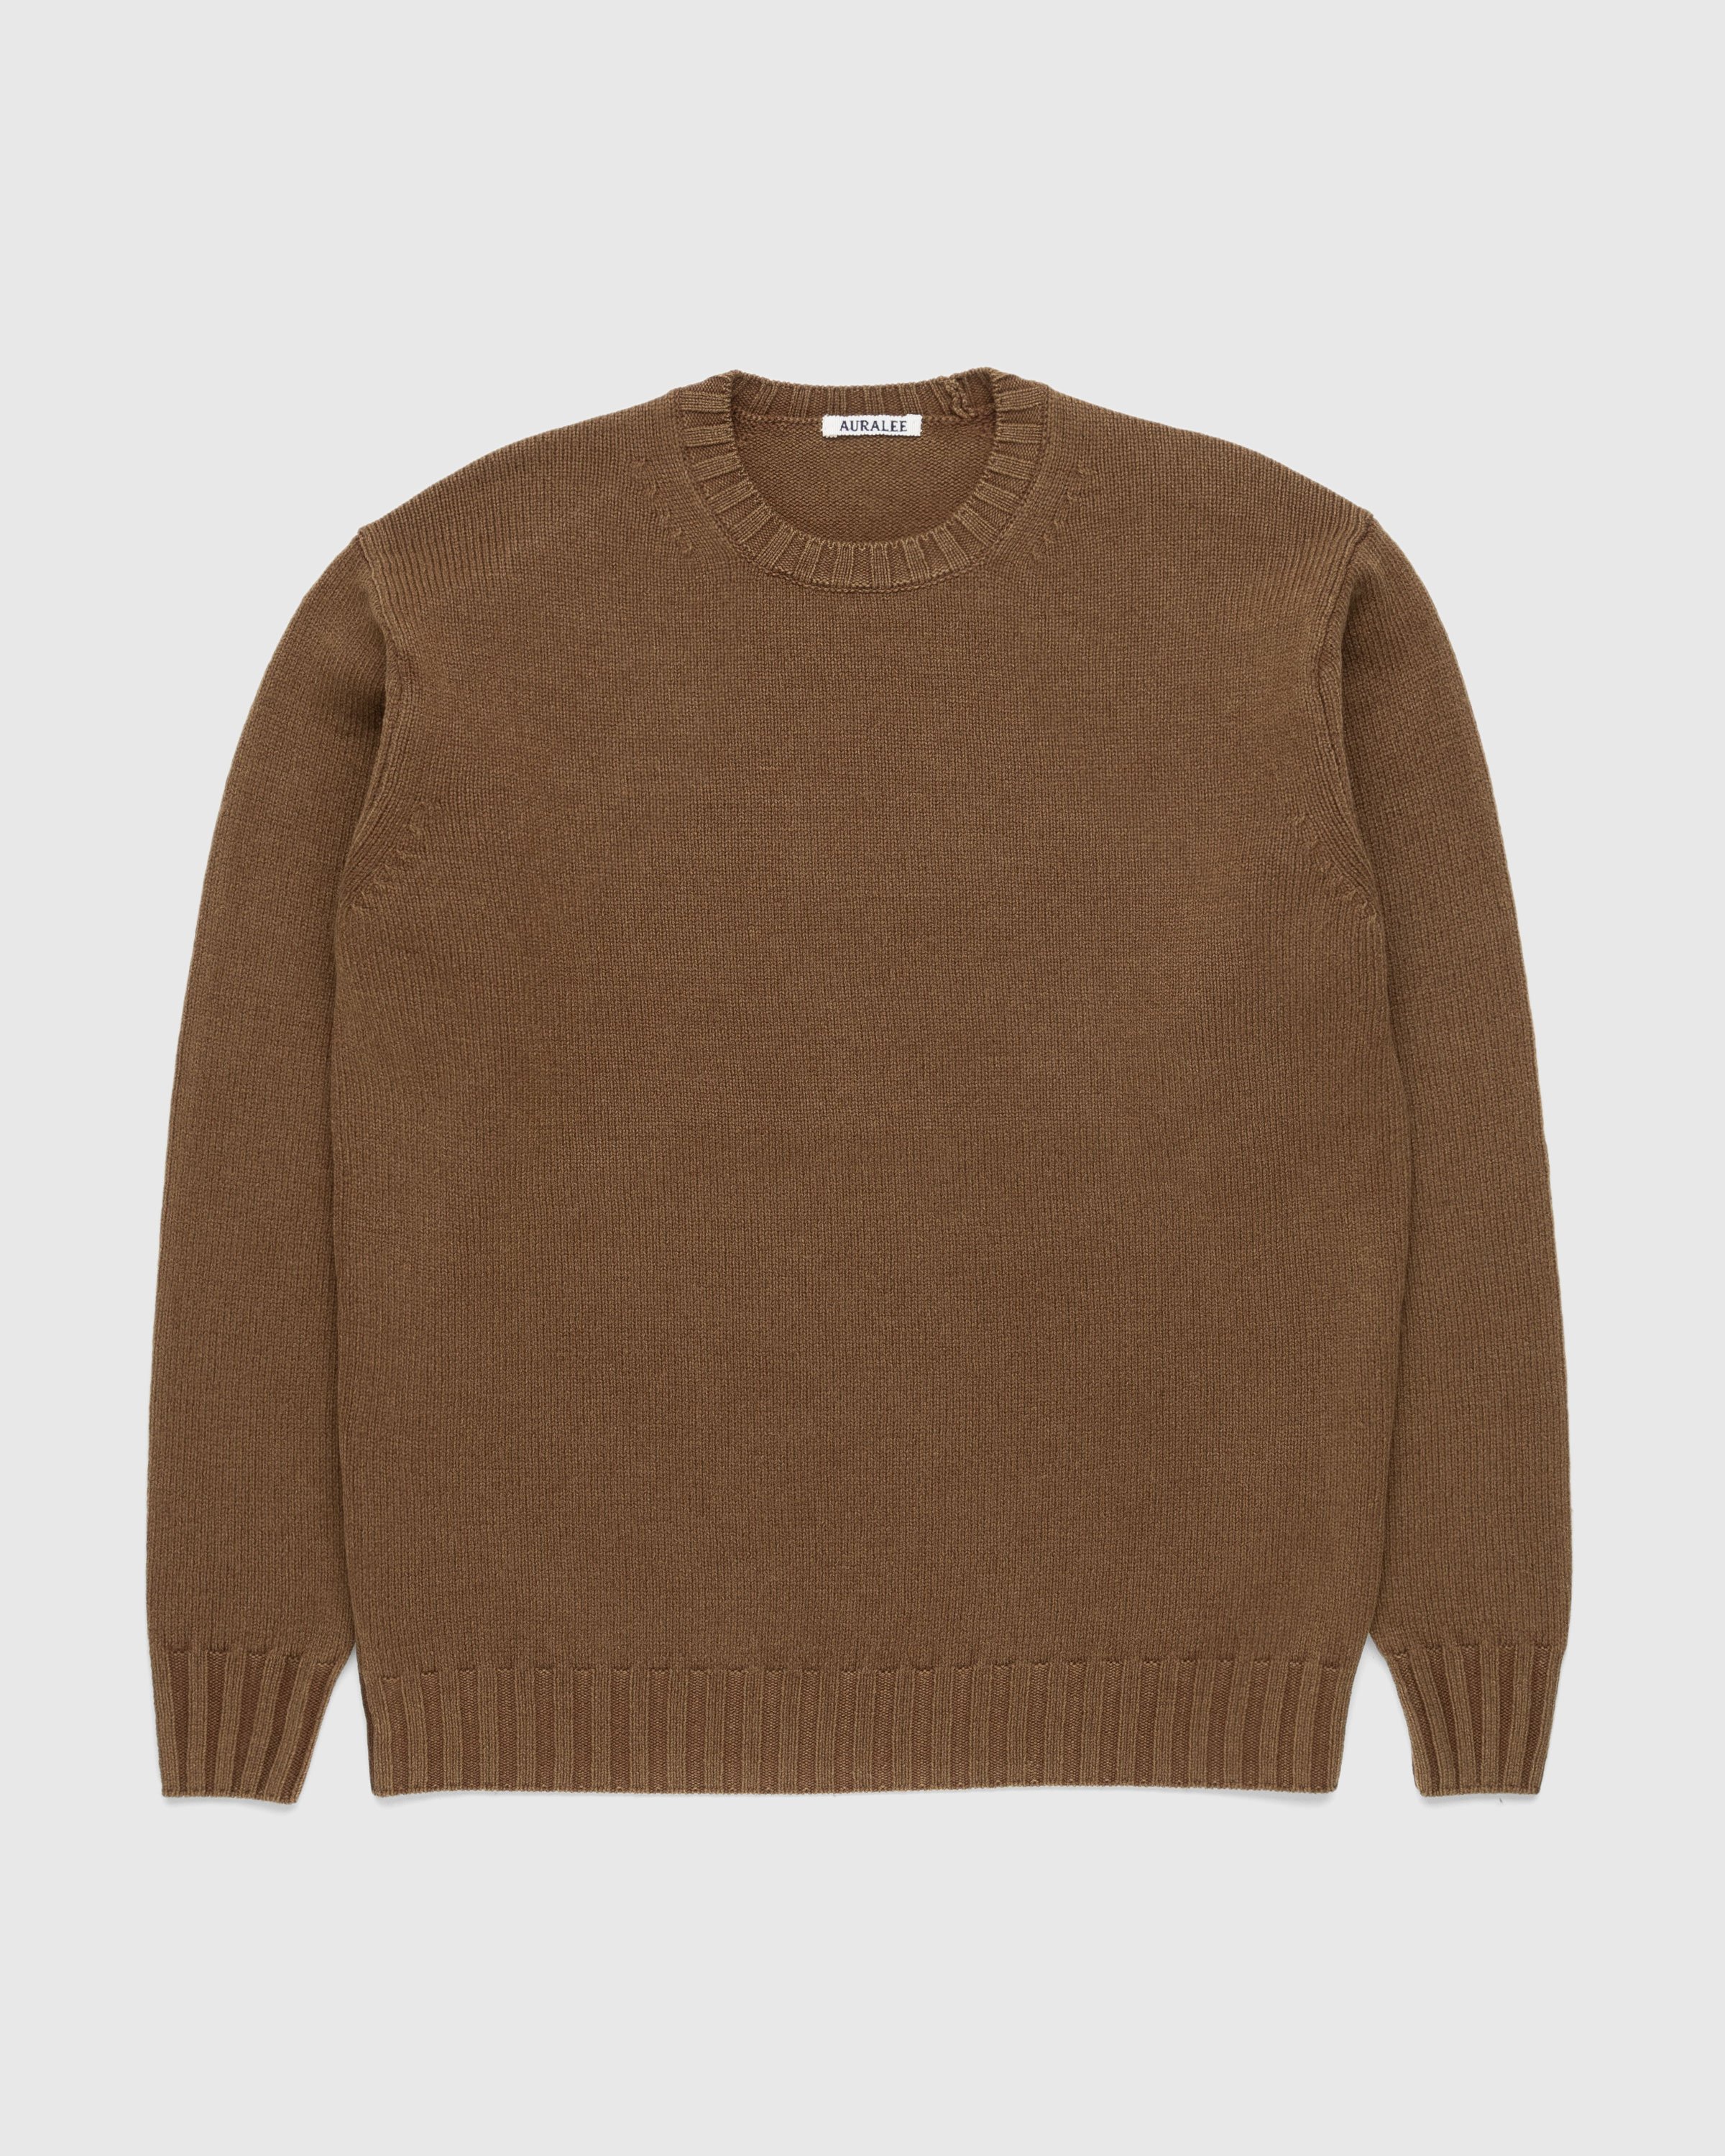 Auralee - Washed French Merino Knit Crewneck Brown - Clothing - Brown - Image 1